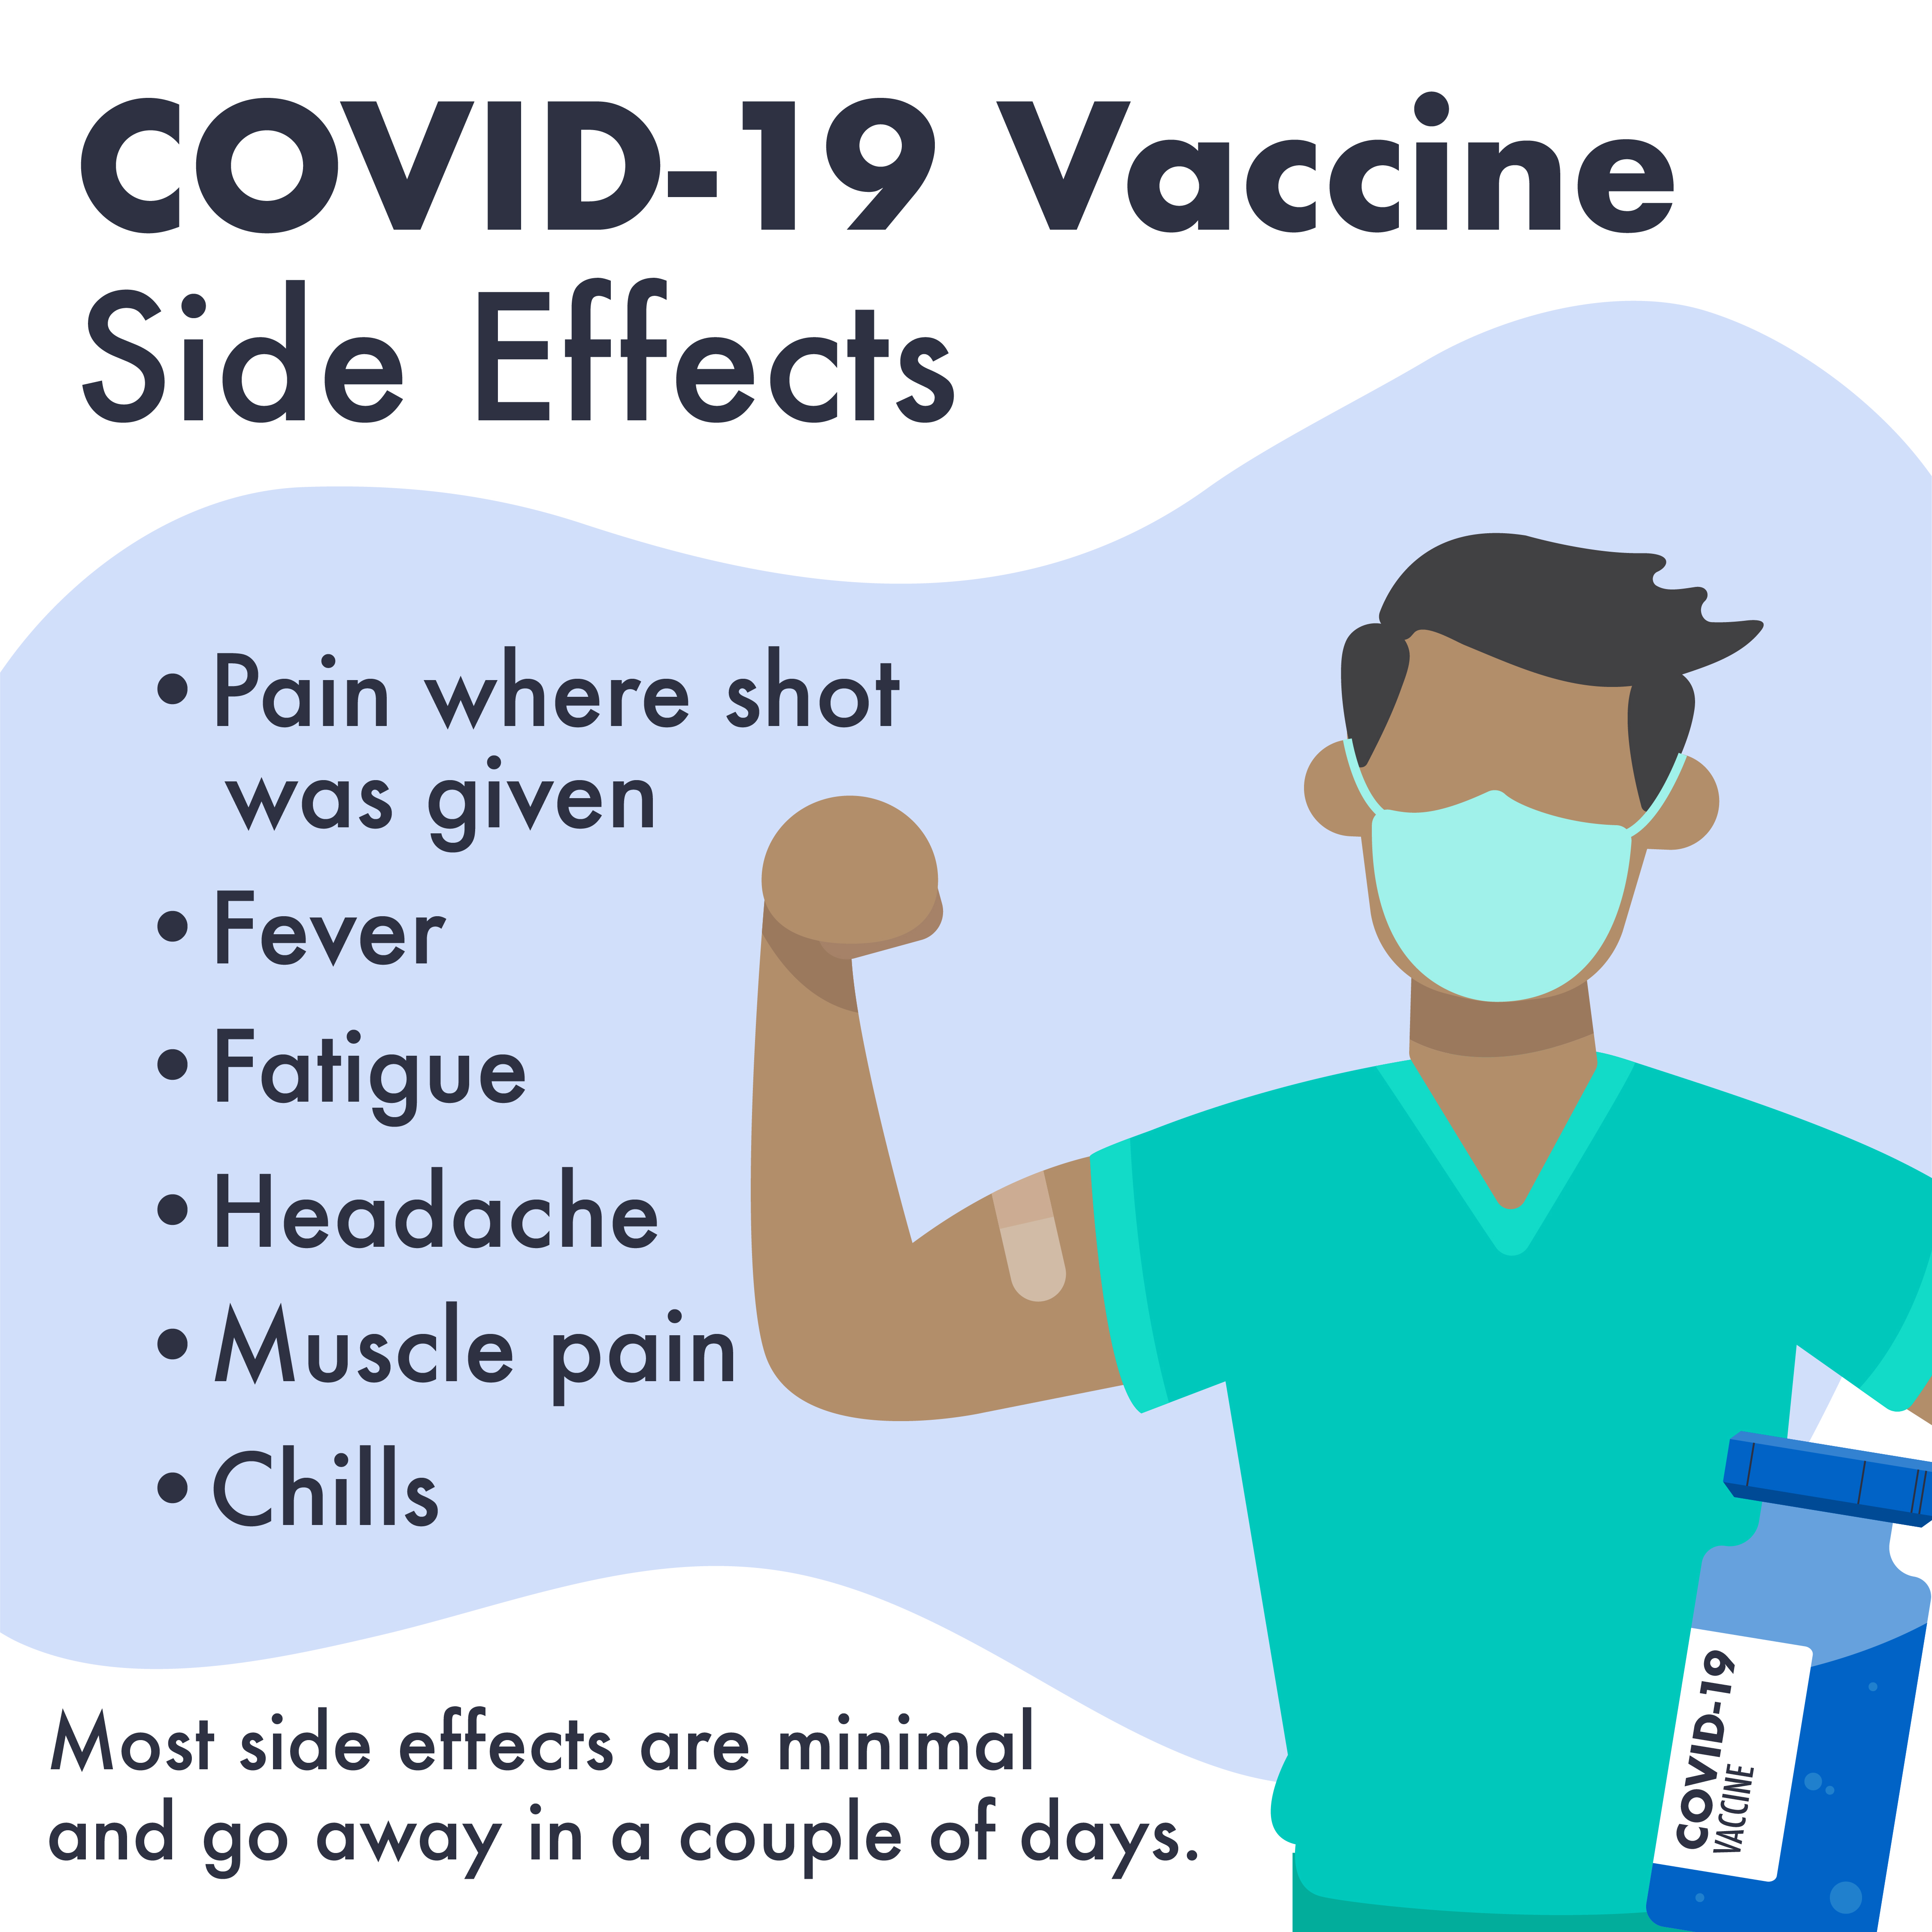 COVID-19 vaccine side effects: pain where the shot was given, fever, fatigue, headache, muscle pain, chills. Most are minimal.